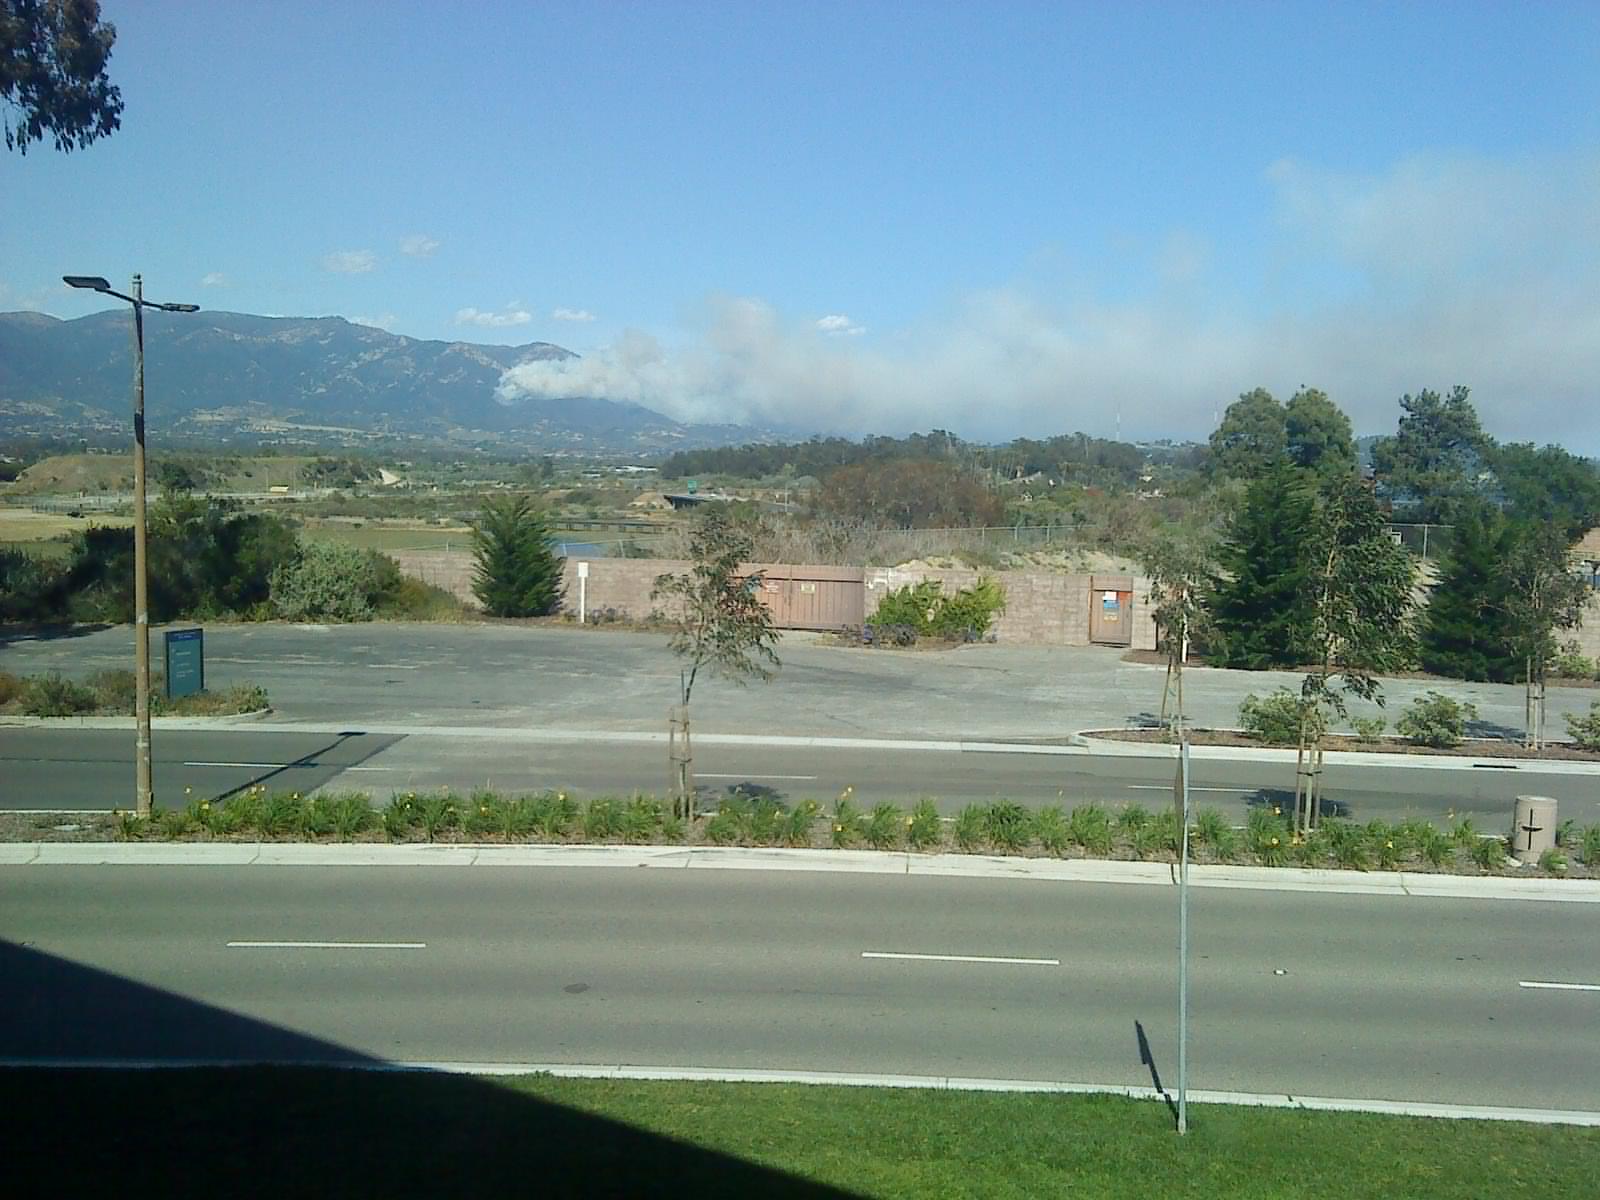 Another fire in the Santa Barbara hills!